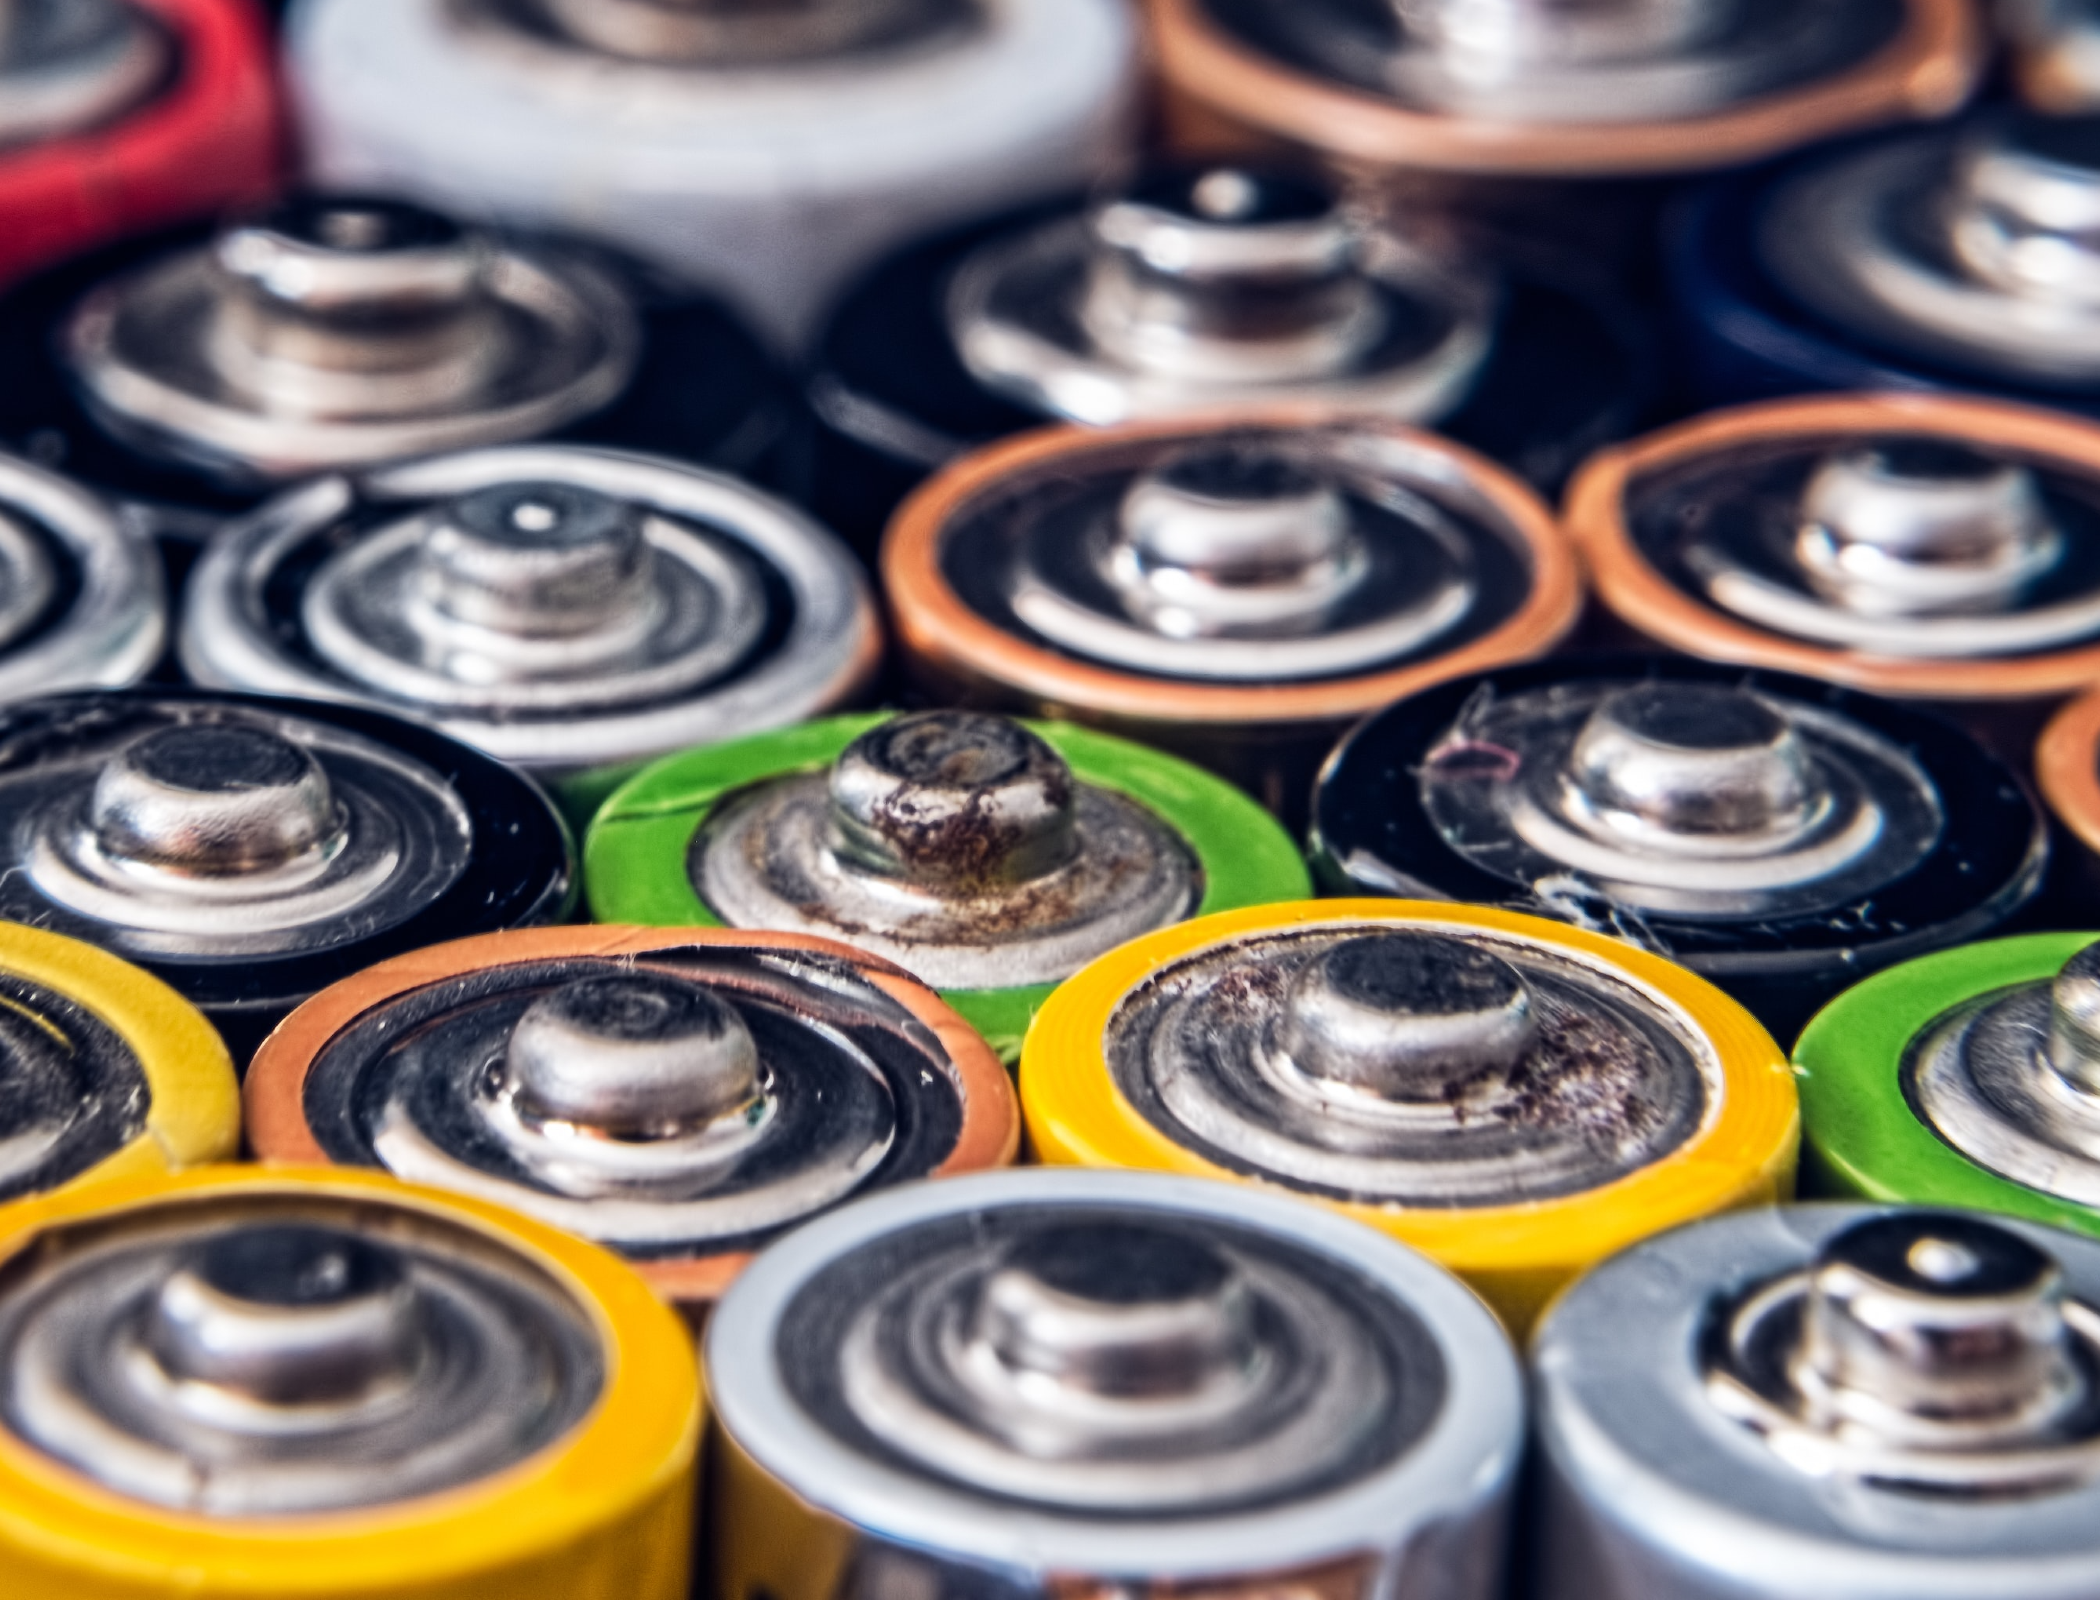 Discarded batteries causing hundreds of fires at waste centres